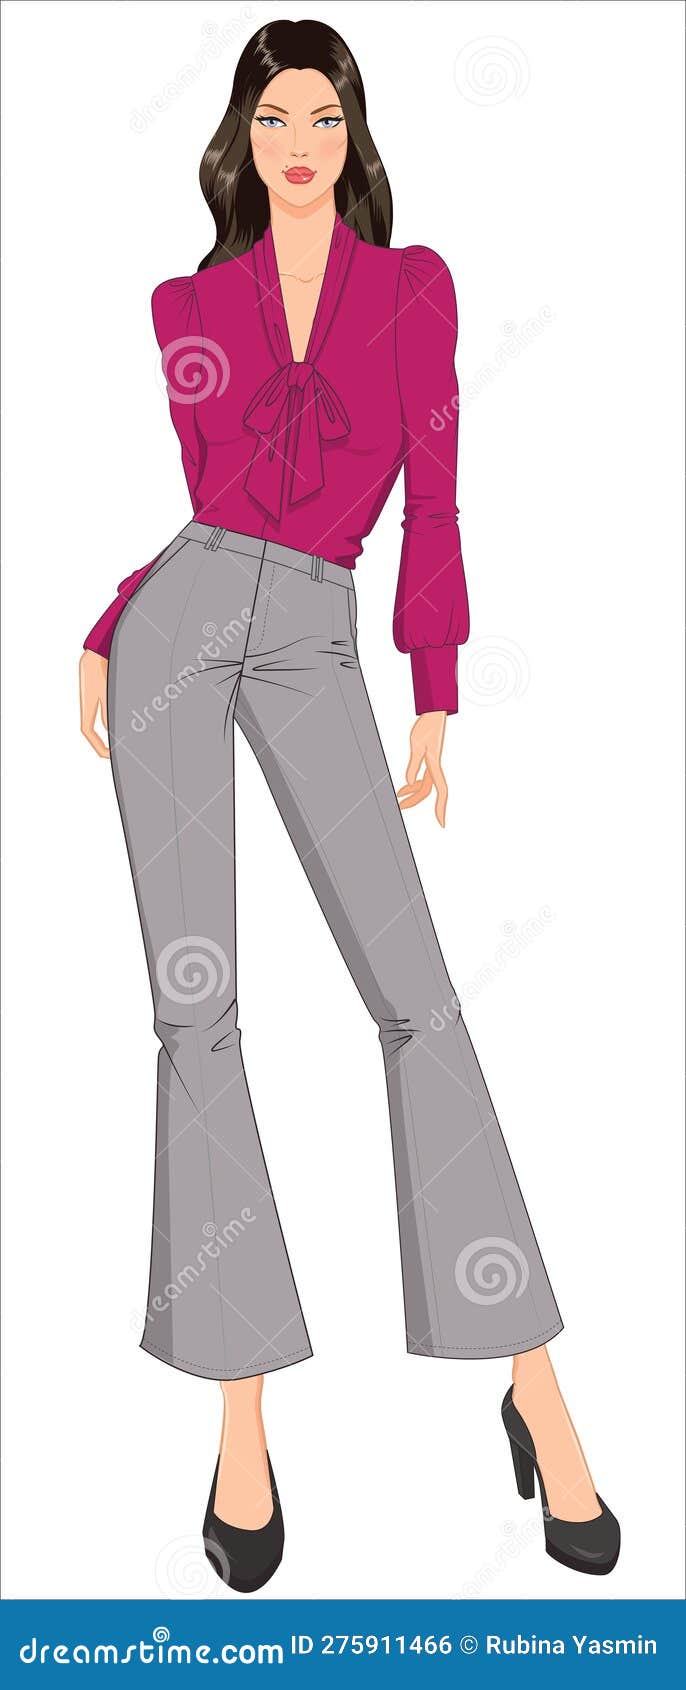 women croquis in smart uniform fir and flare pants with pussy bow top